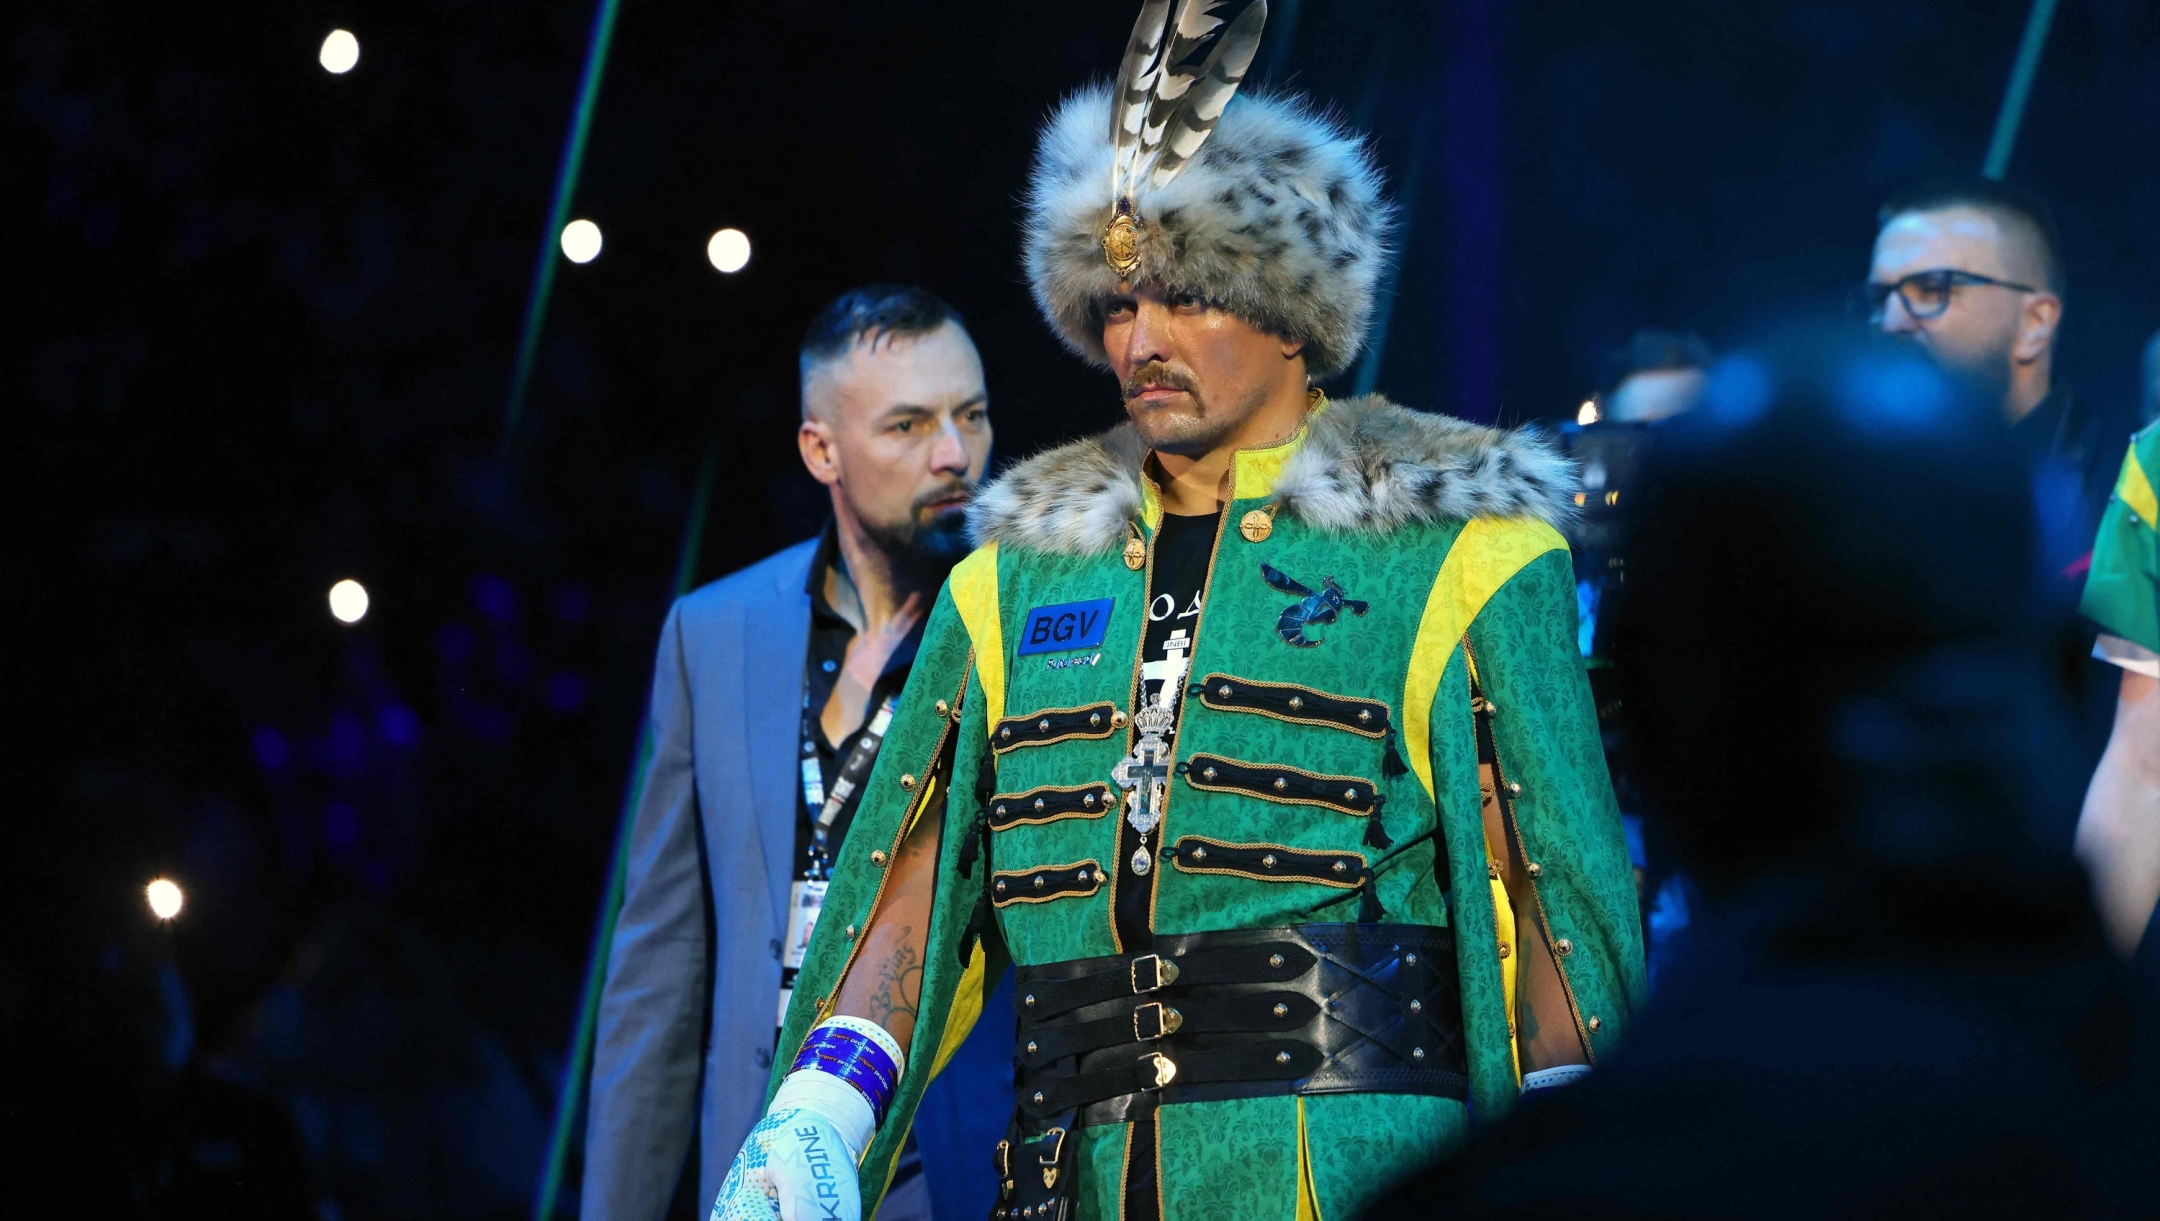 Ukraine's Oleksandr Usyk (C) arrives for a heavyweight boxing world championship fight against Britain's Tyson Fury at Kingdom Arena in Riyadh, Saudi Arabia on May 19, 2024. Oleksandr Usyk beat Tyson Fury by split decision to win the world's first undisputed heavyweight championship in 25 years on May 19, 2024, an unprecedented feat in boxing's four-belt era. (Photo by Fayez NURELDINE / AFP)